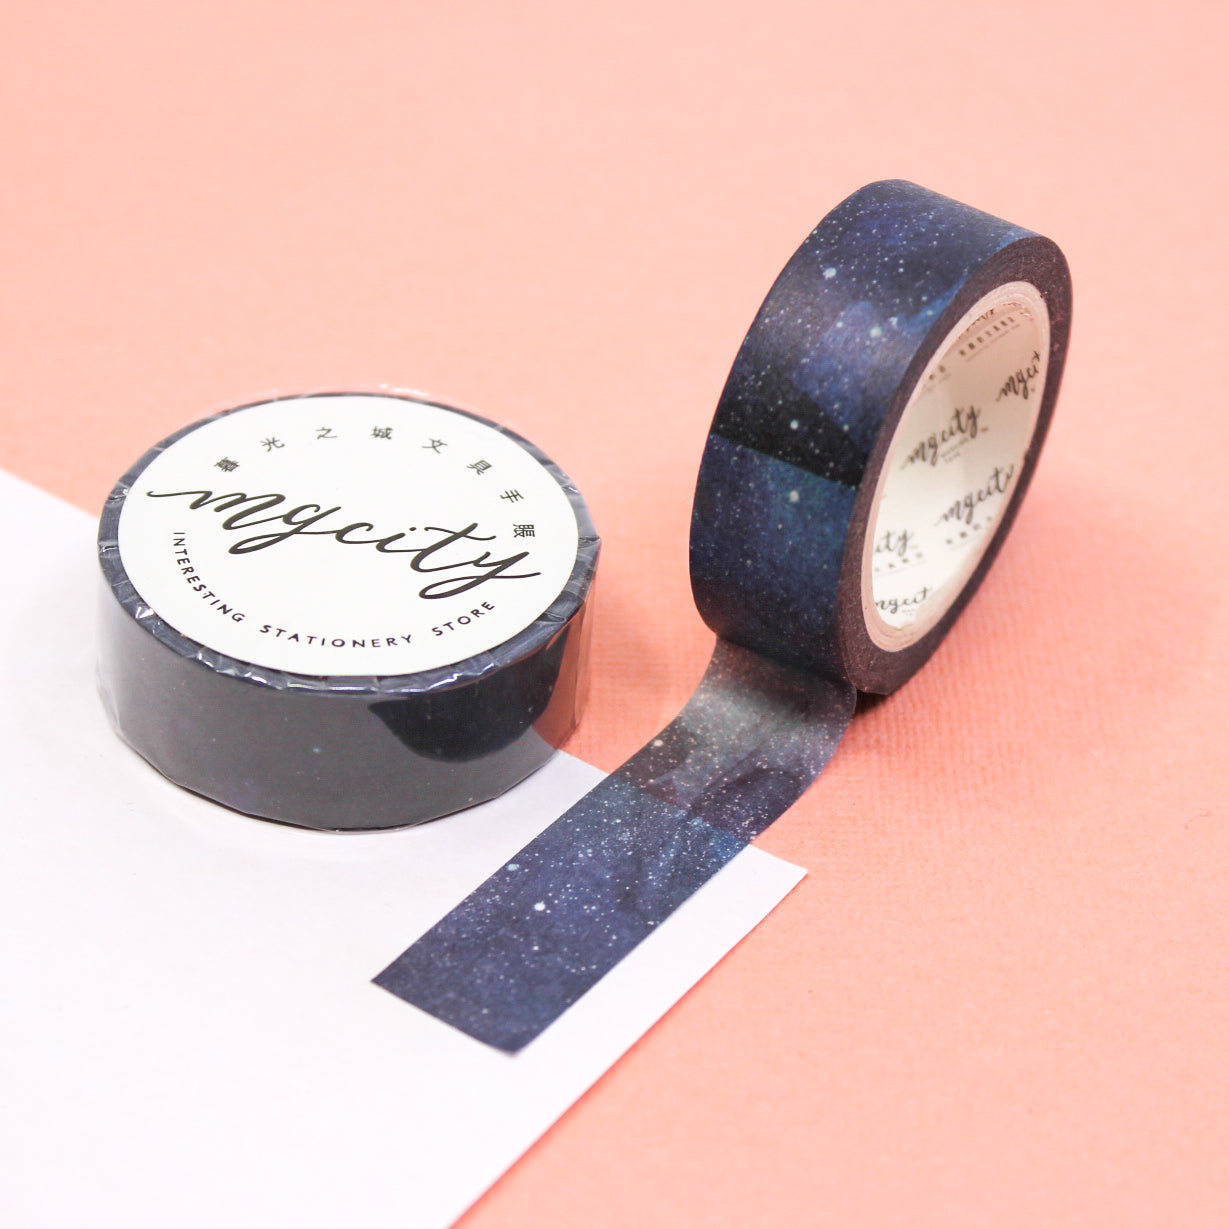 This starry night sky watercolor washi tape is the perfect addition to your washi collection. The simplicity of the pattern is perfect for accenting and matching any project's theme while adding a beautiful and interesting pattern. This tape is sold at BBB Supplies Craft Shop.